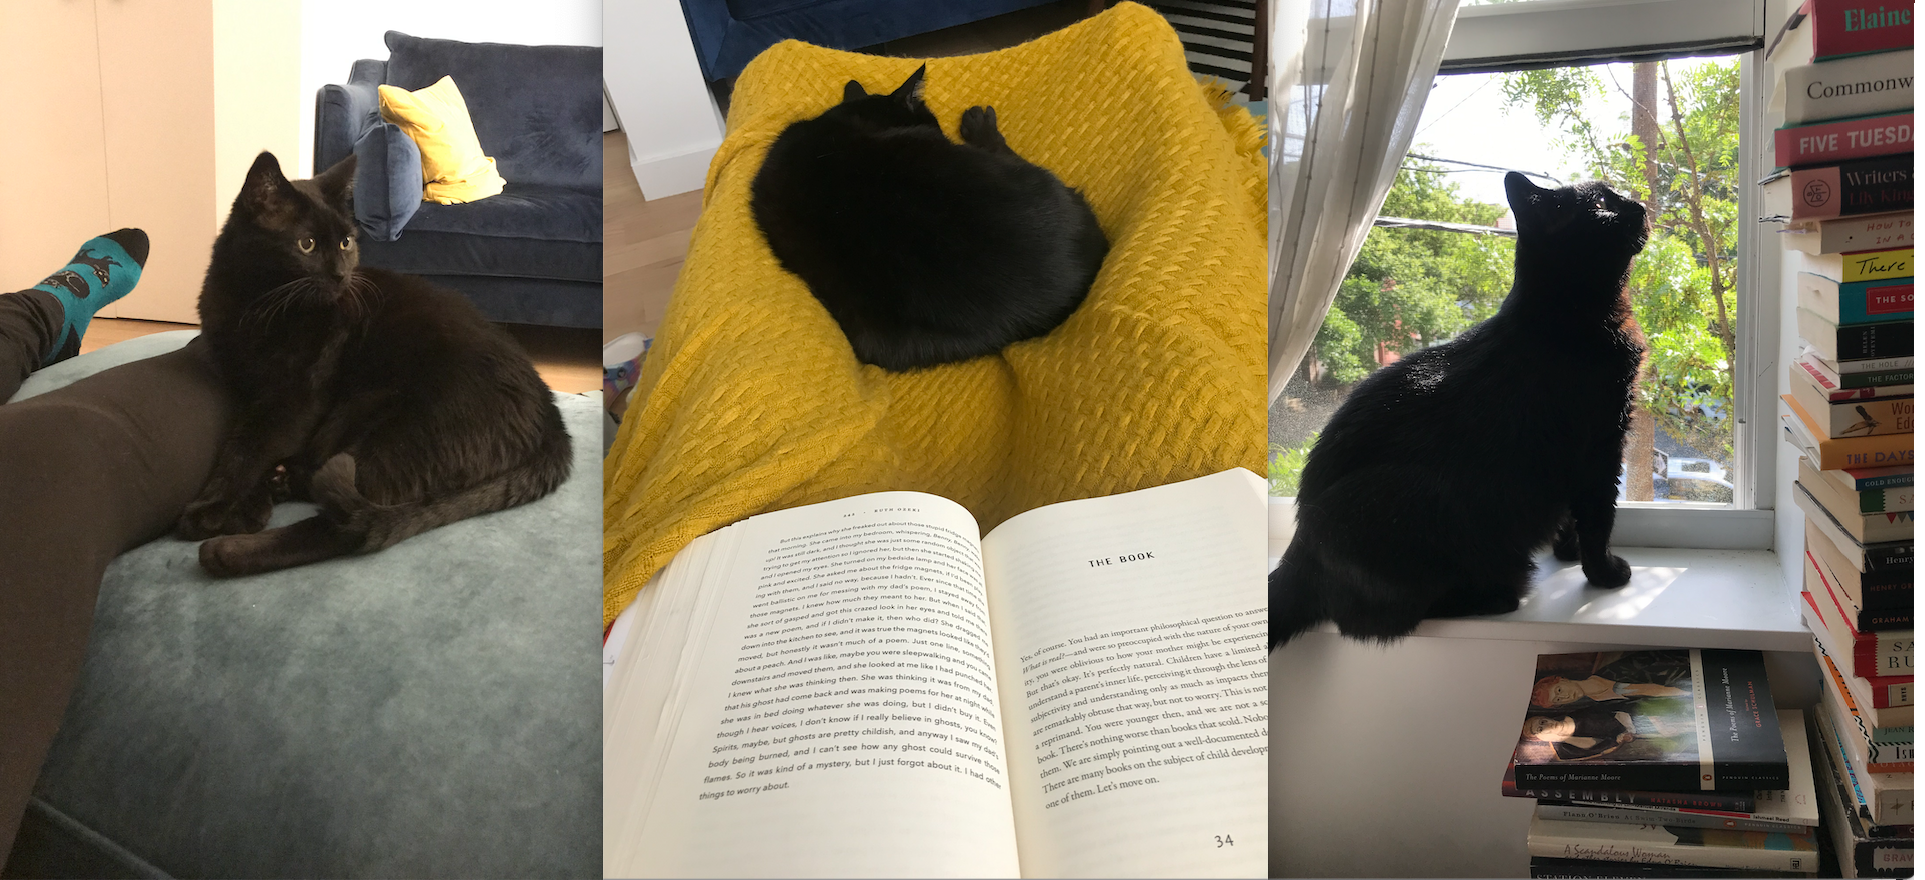 Three pictures of the cutest black cat who ever lived. In the first, he sits like a merman next to a person's leg. In the second he is curled up like an all ball at the feet of a person reading a book. In the third, he sits in a window next to a stack of books, with the sun shining down on his tiny little face.